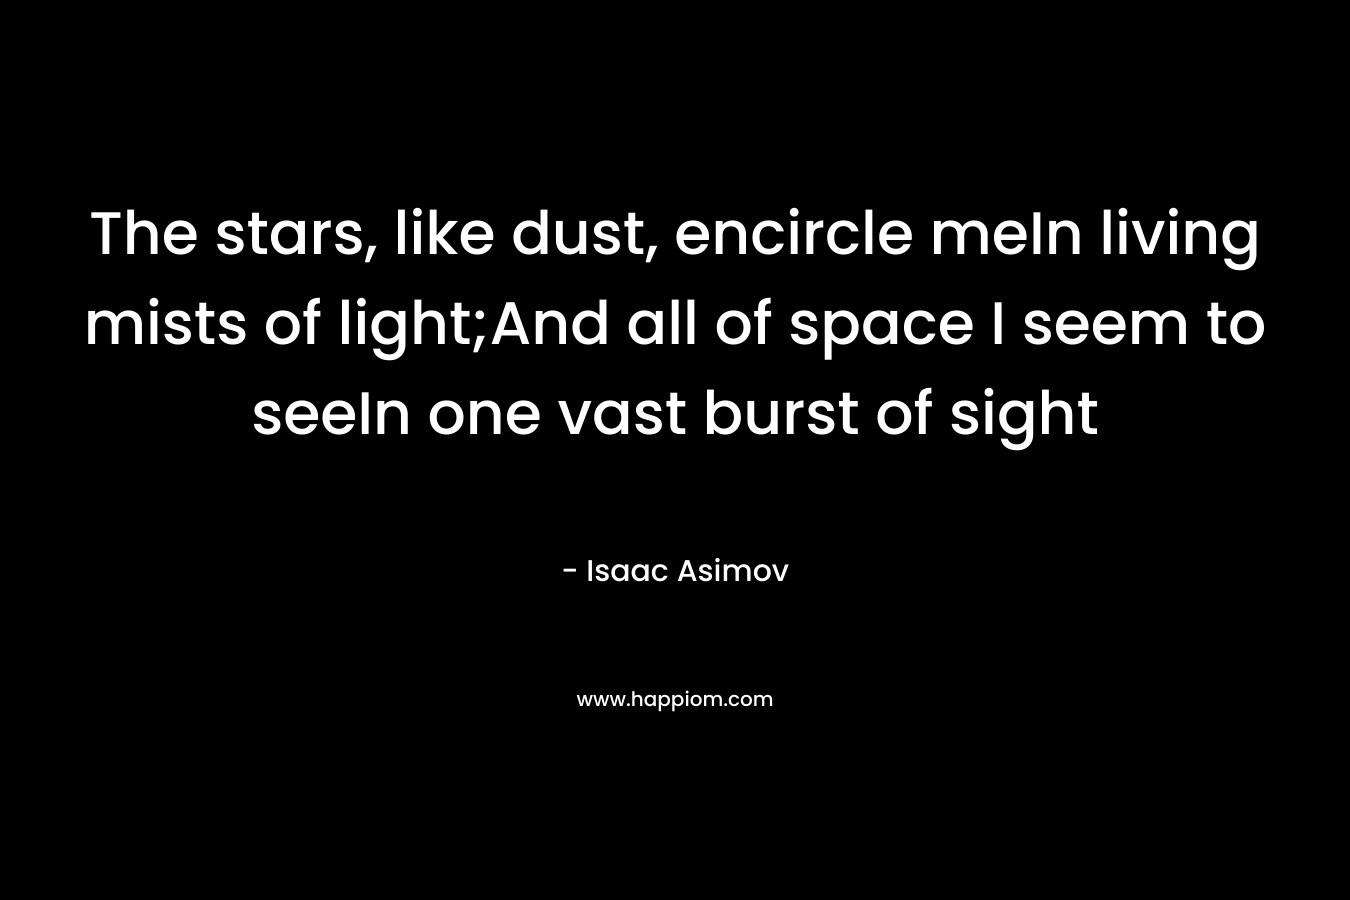 The stars, like dust, encircle meIn living mists of light;And all of space I seem to seeIn one vast burst of sight